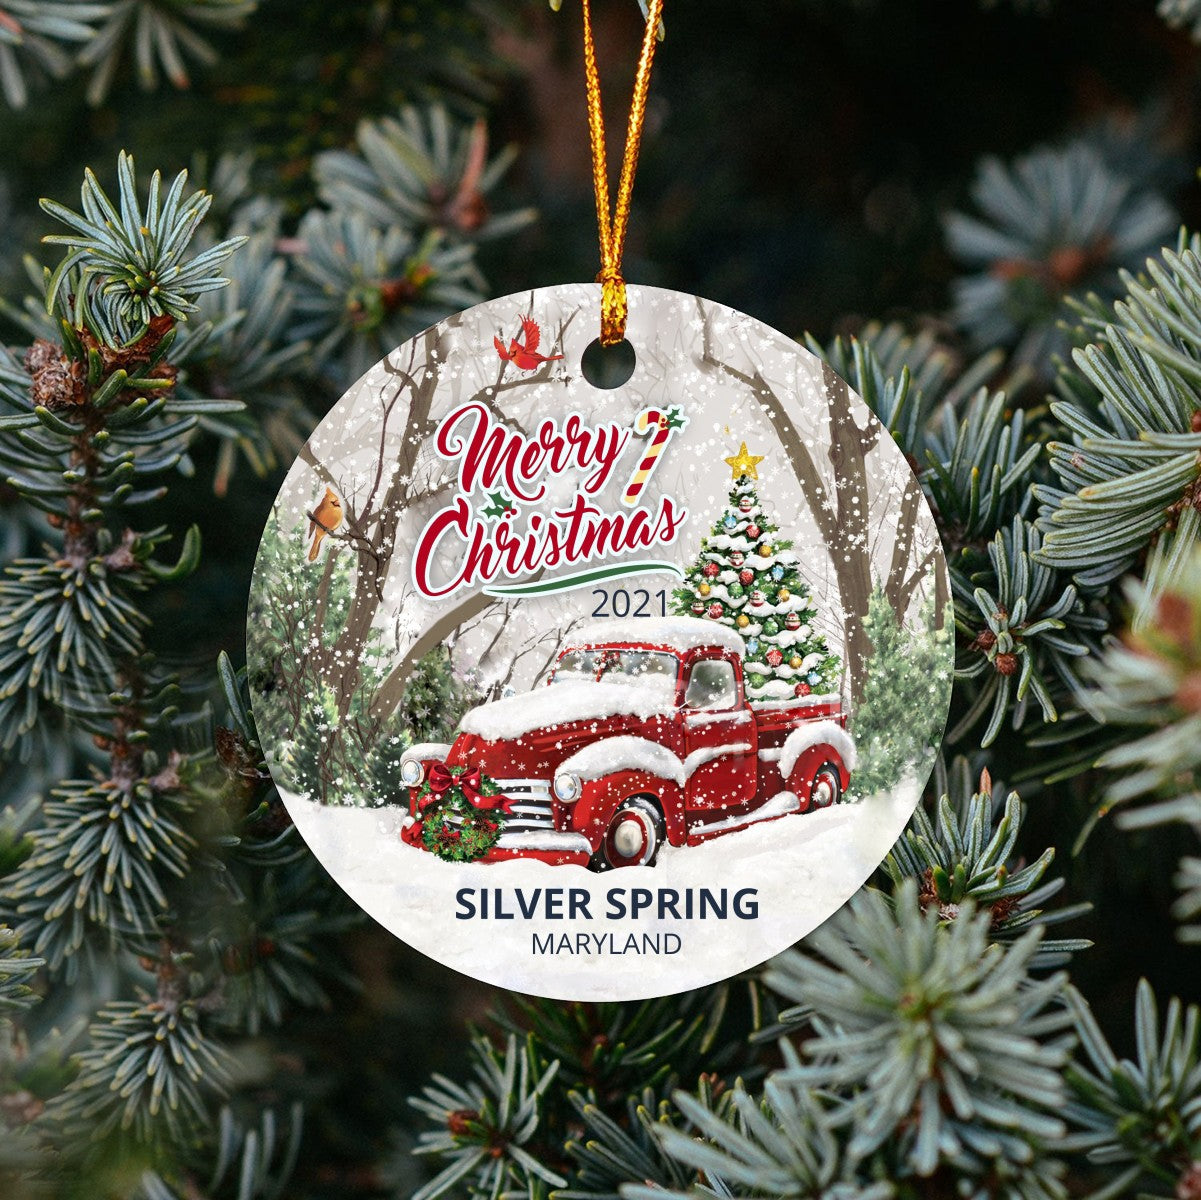 Christmas Tree Ornaments Silver Spring - Ornament Customize With Name City And State Silver Spring Maryland MD - Red Truck Xmas Ornaments 3'' Plastic Gift For Family, Friend And Housewarming